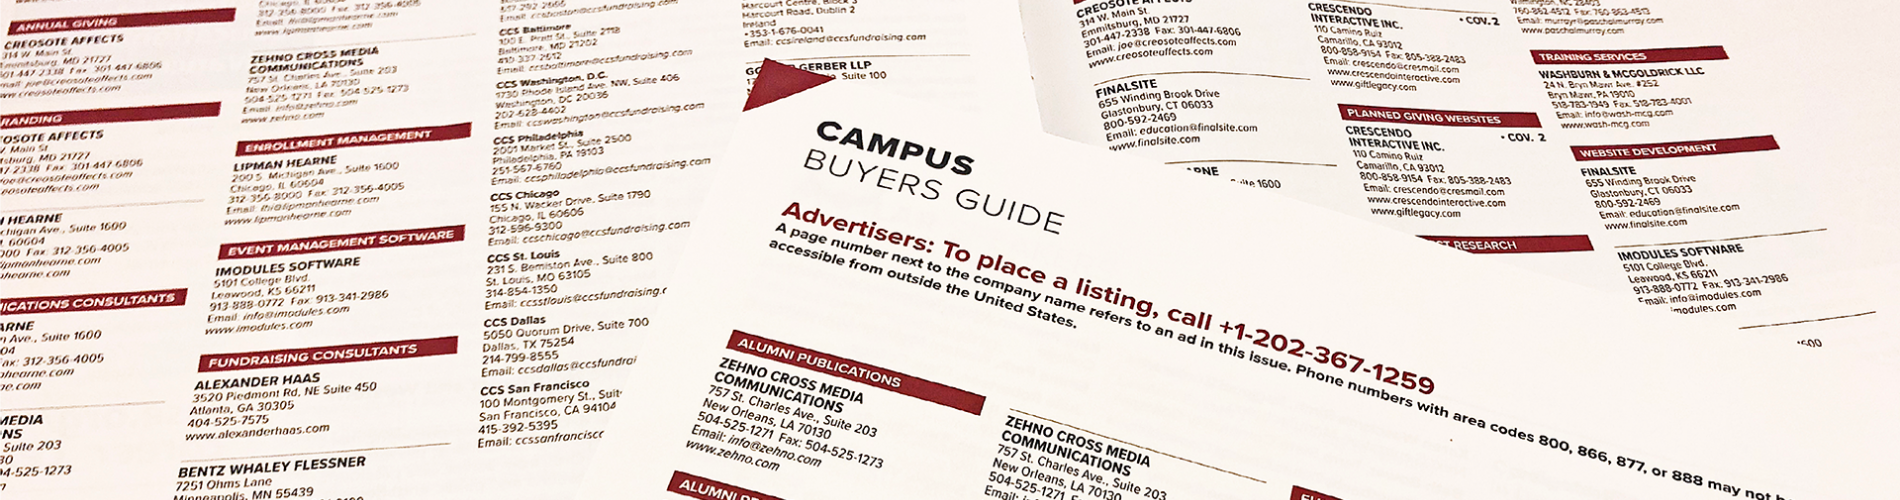 Campus buyers guide header image